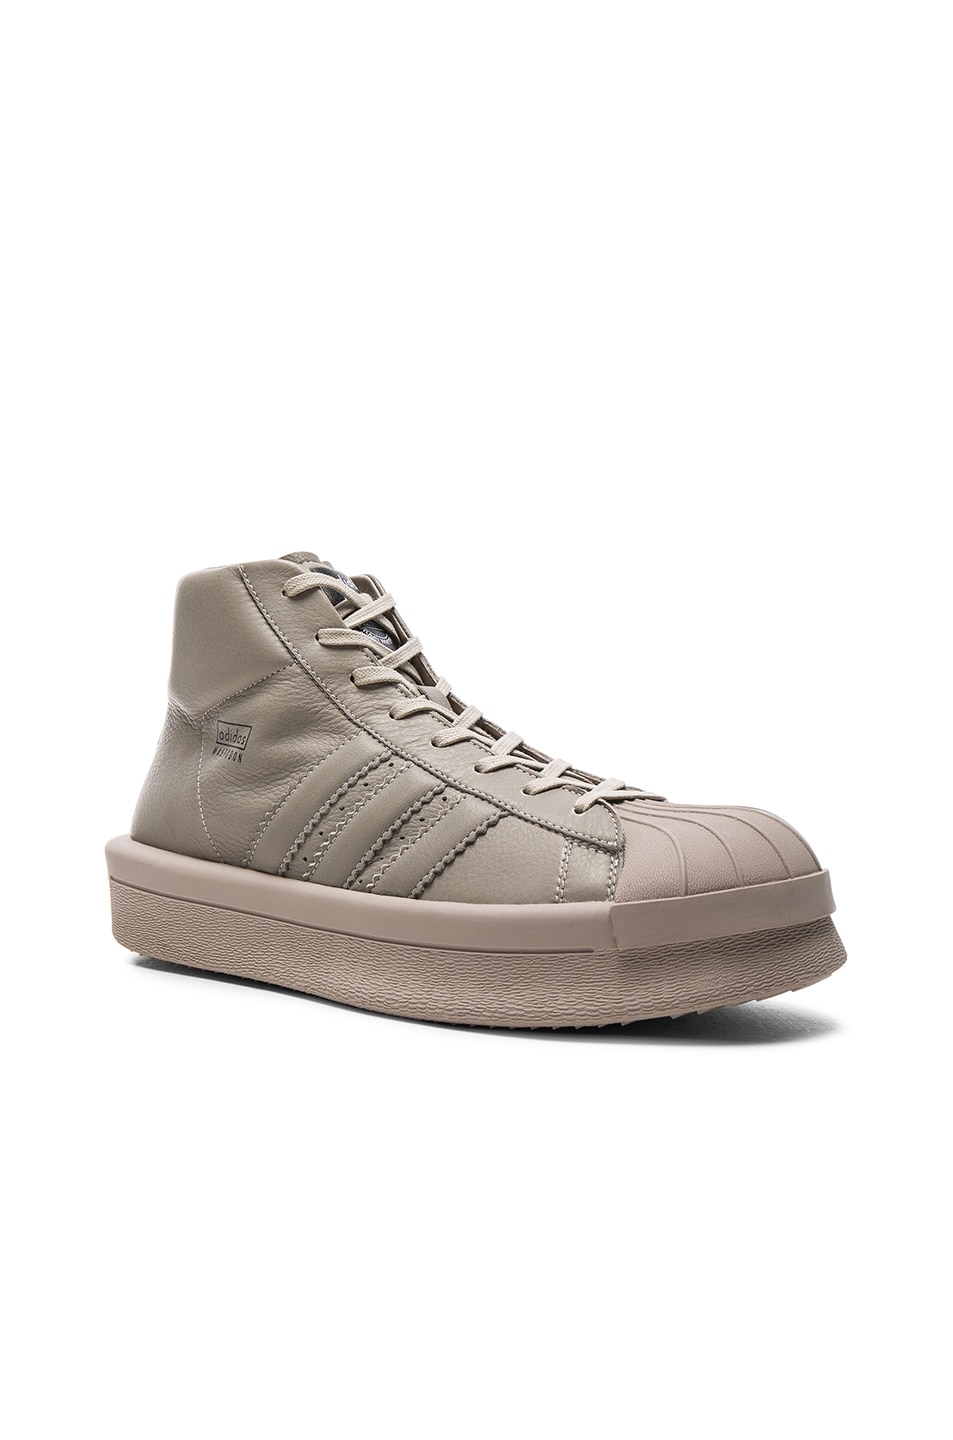 Image 1 of Rick Owens x Adidas Leather Pro Model Sneakers in Pearl